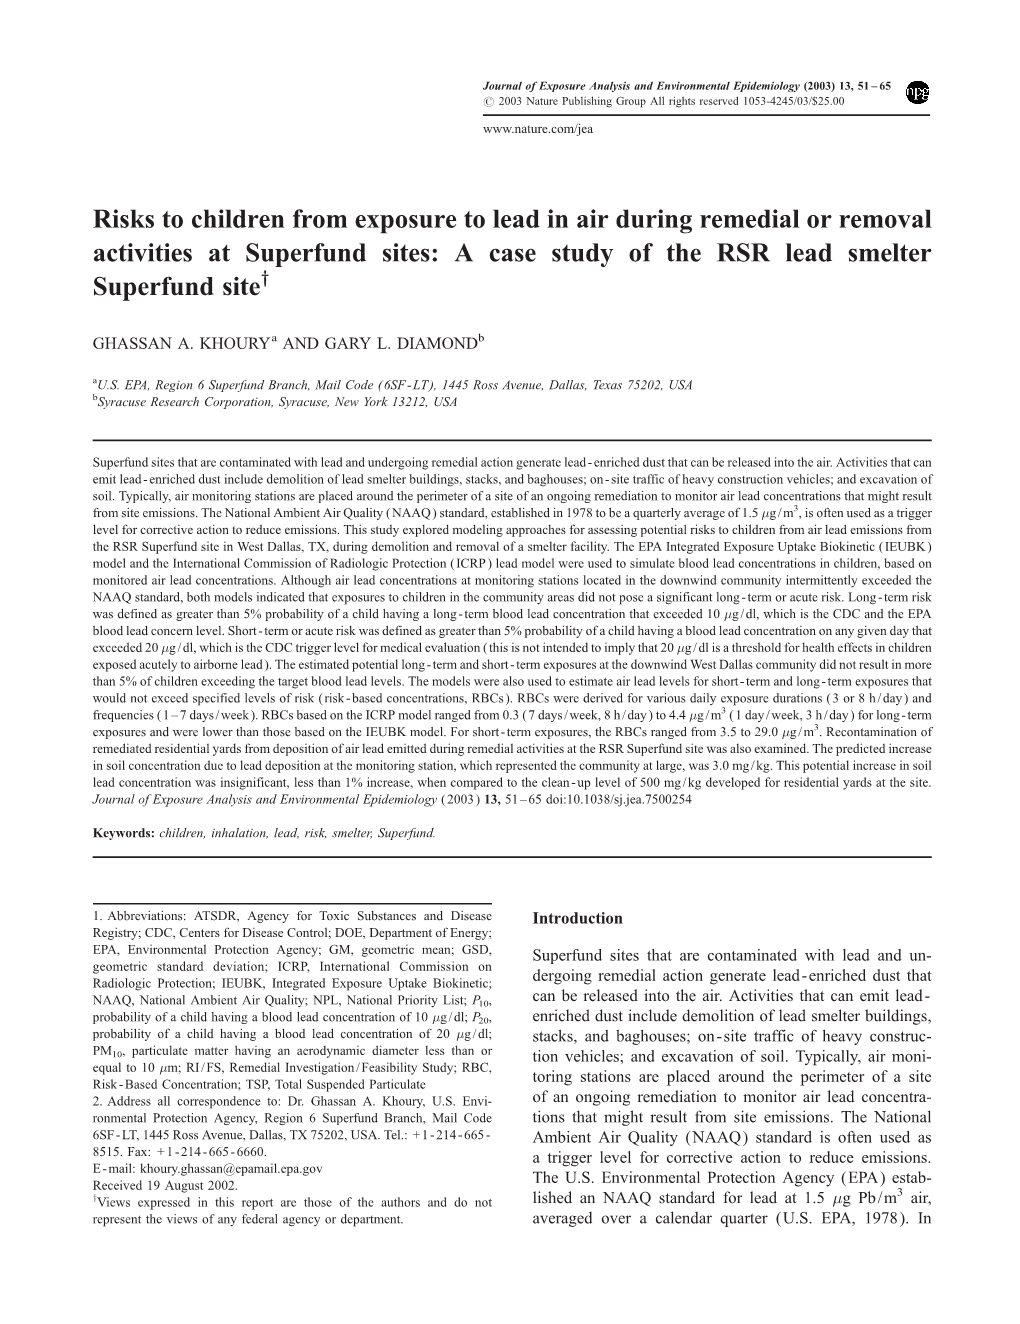 Risks to Children from Exposure to Lead in Air During Remedial Or Removal Activities at Superfund Sites: a Case Study of the RSR Lead Smelter Superfund Sitey